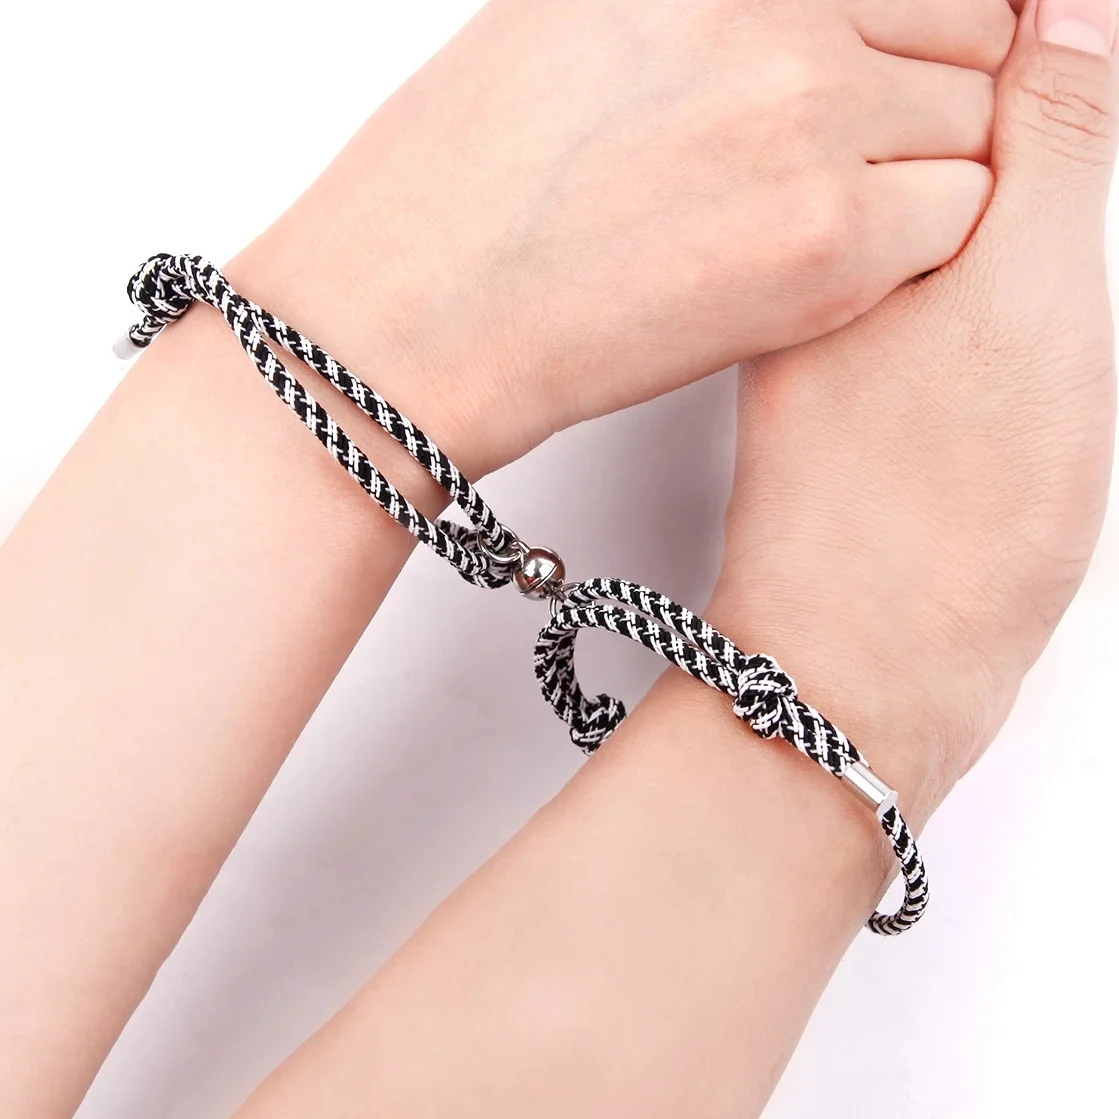 

2Pcs Magnetic Couple Bracelet Braided Rope Distance Attract Eachother Wrist Chain Jewelry Lover Friendship Rope Bracelets